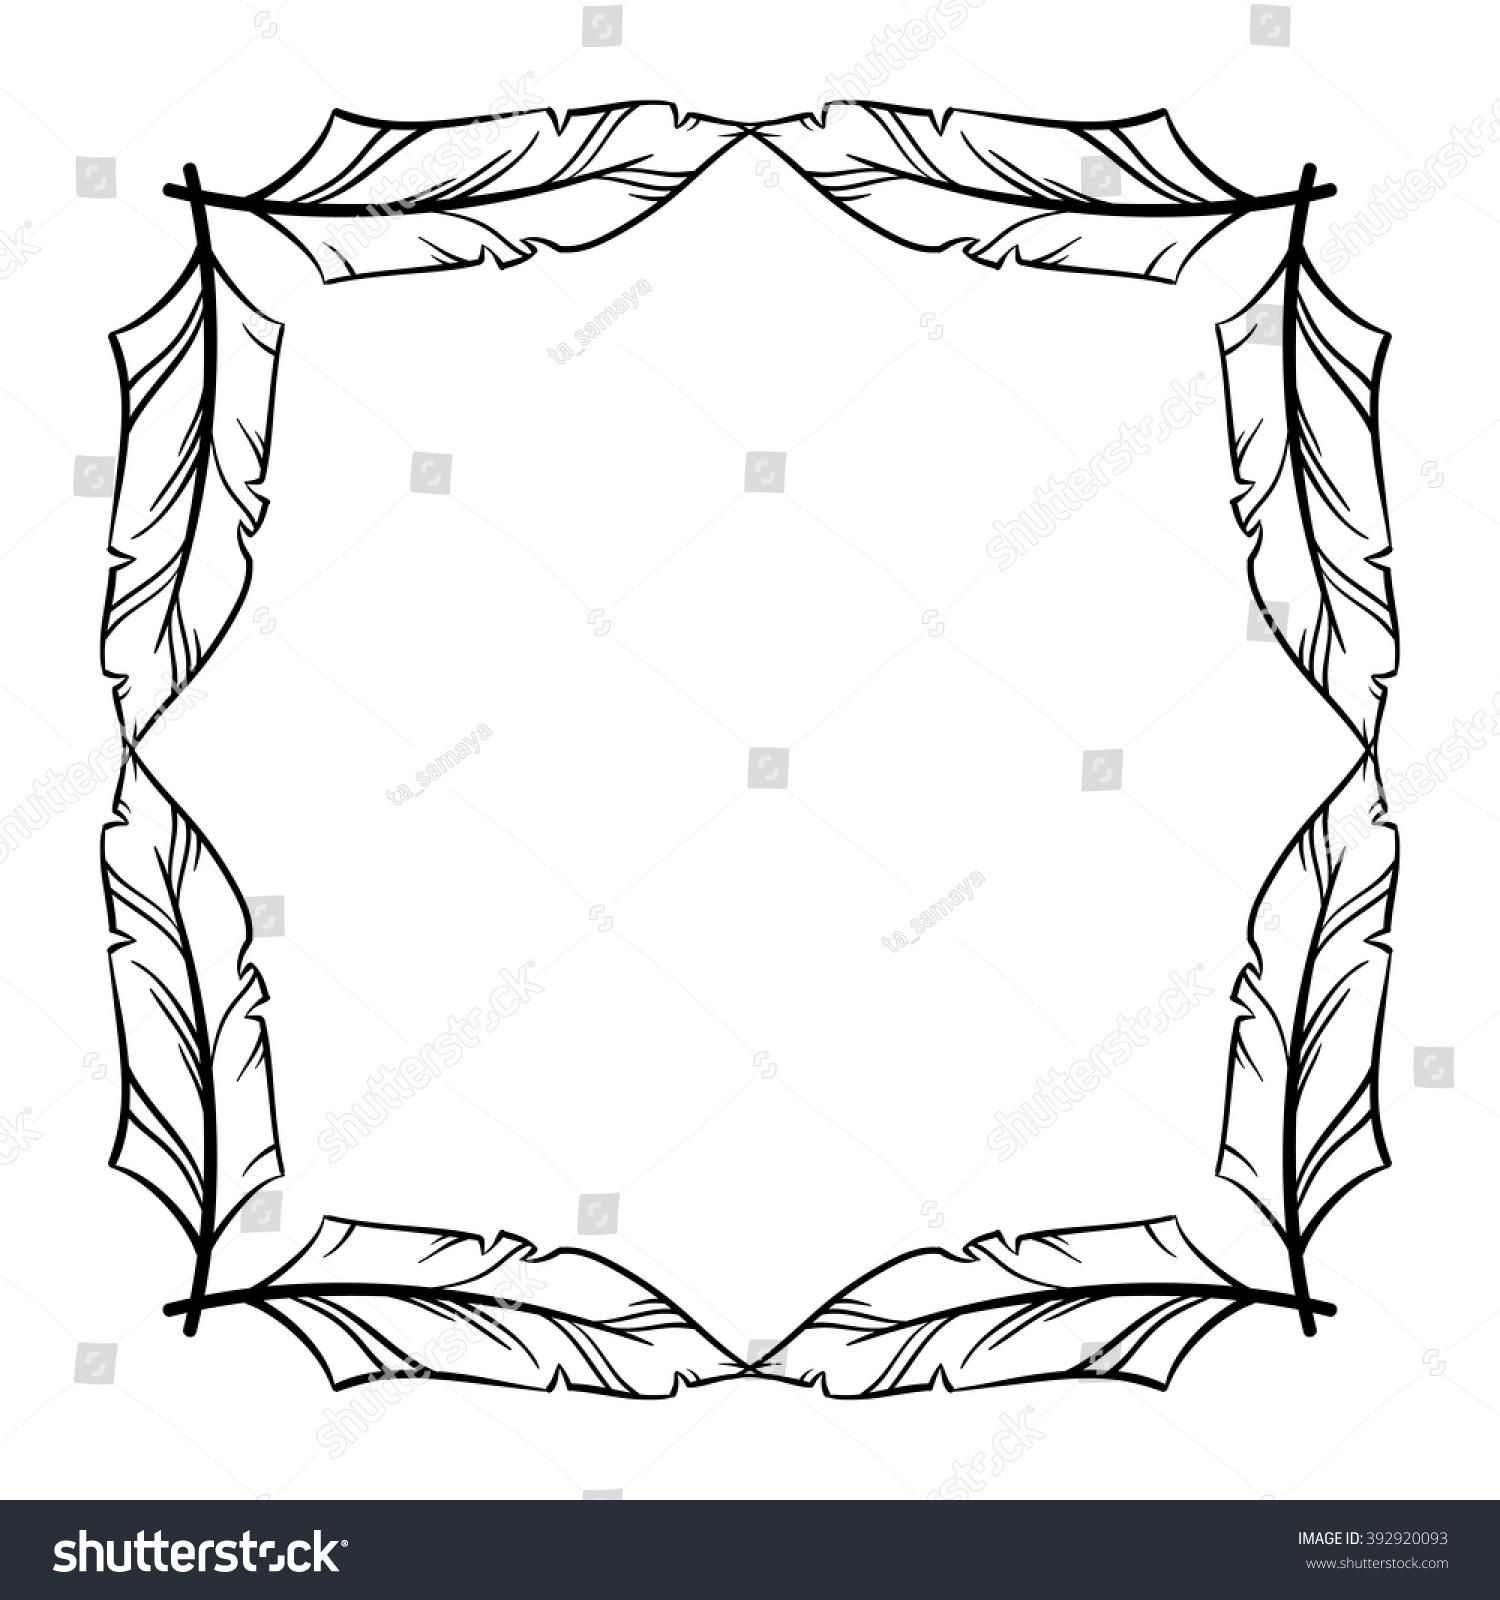 Download Feather Frame Vector Set Hand Drawn Stock Vector 392920093 ...